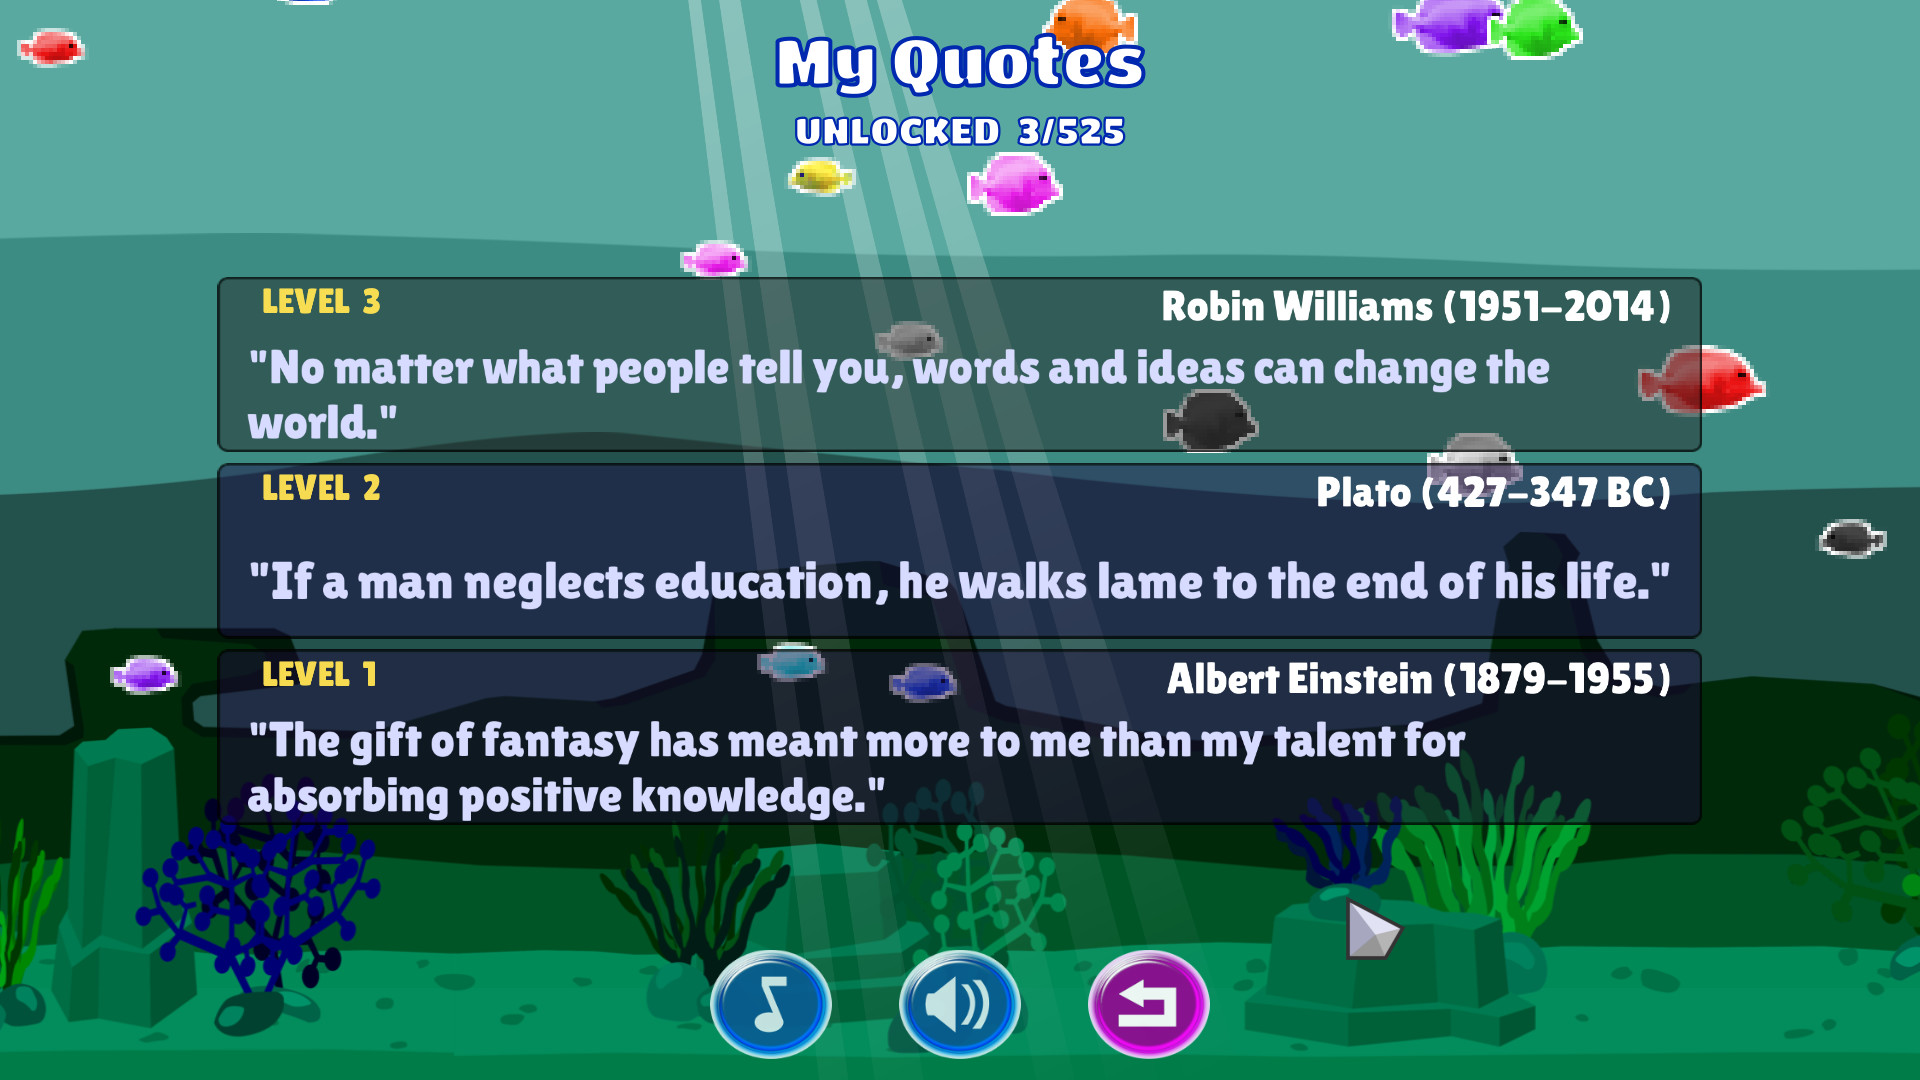 Quotes Quest - Match 3 Free Download